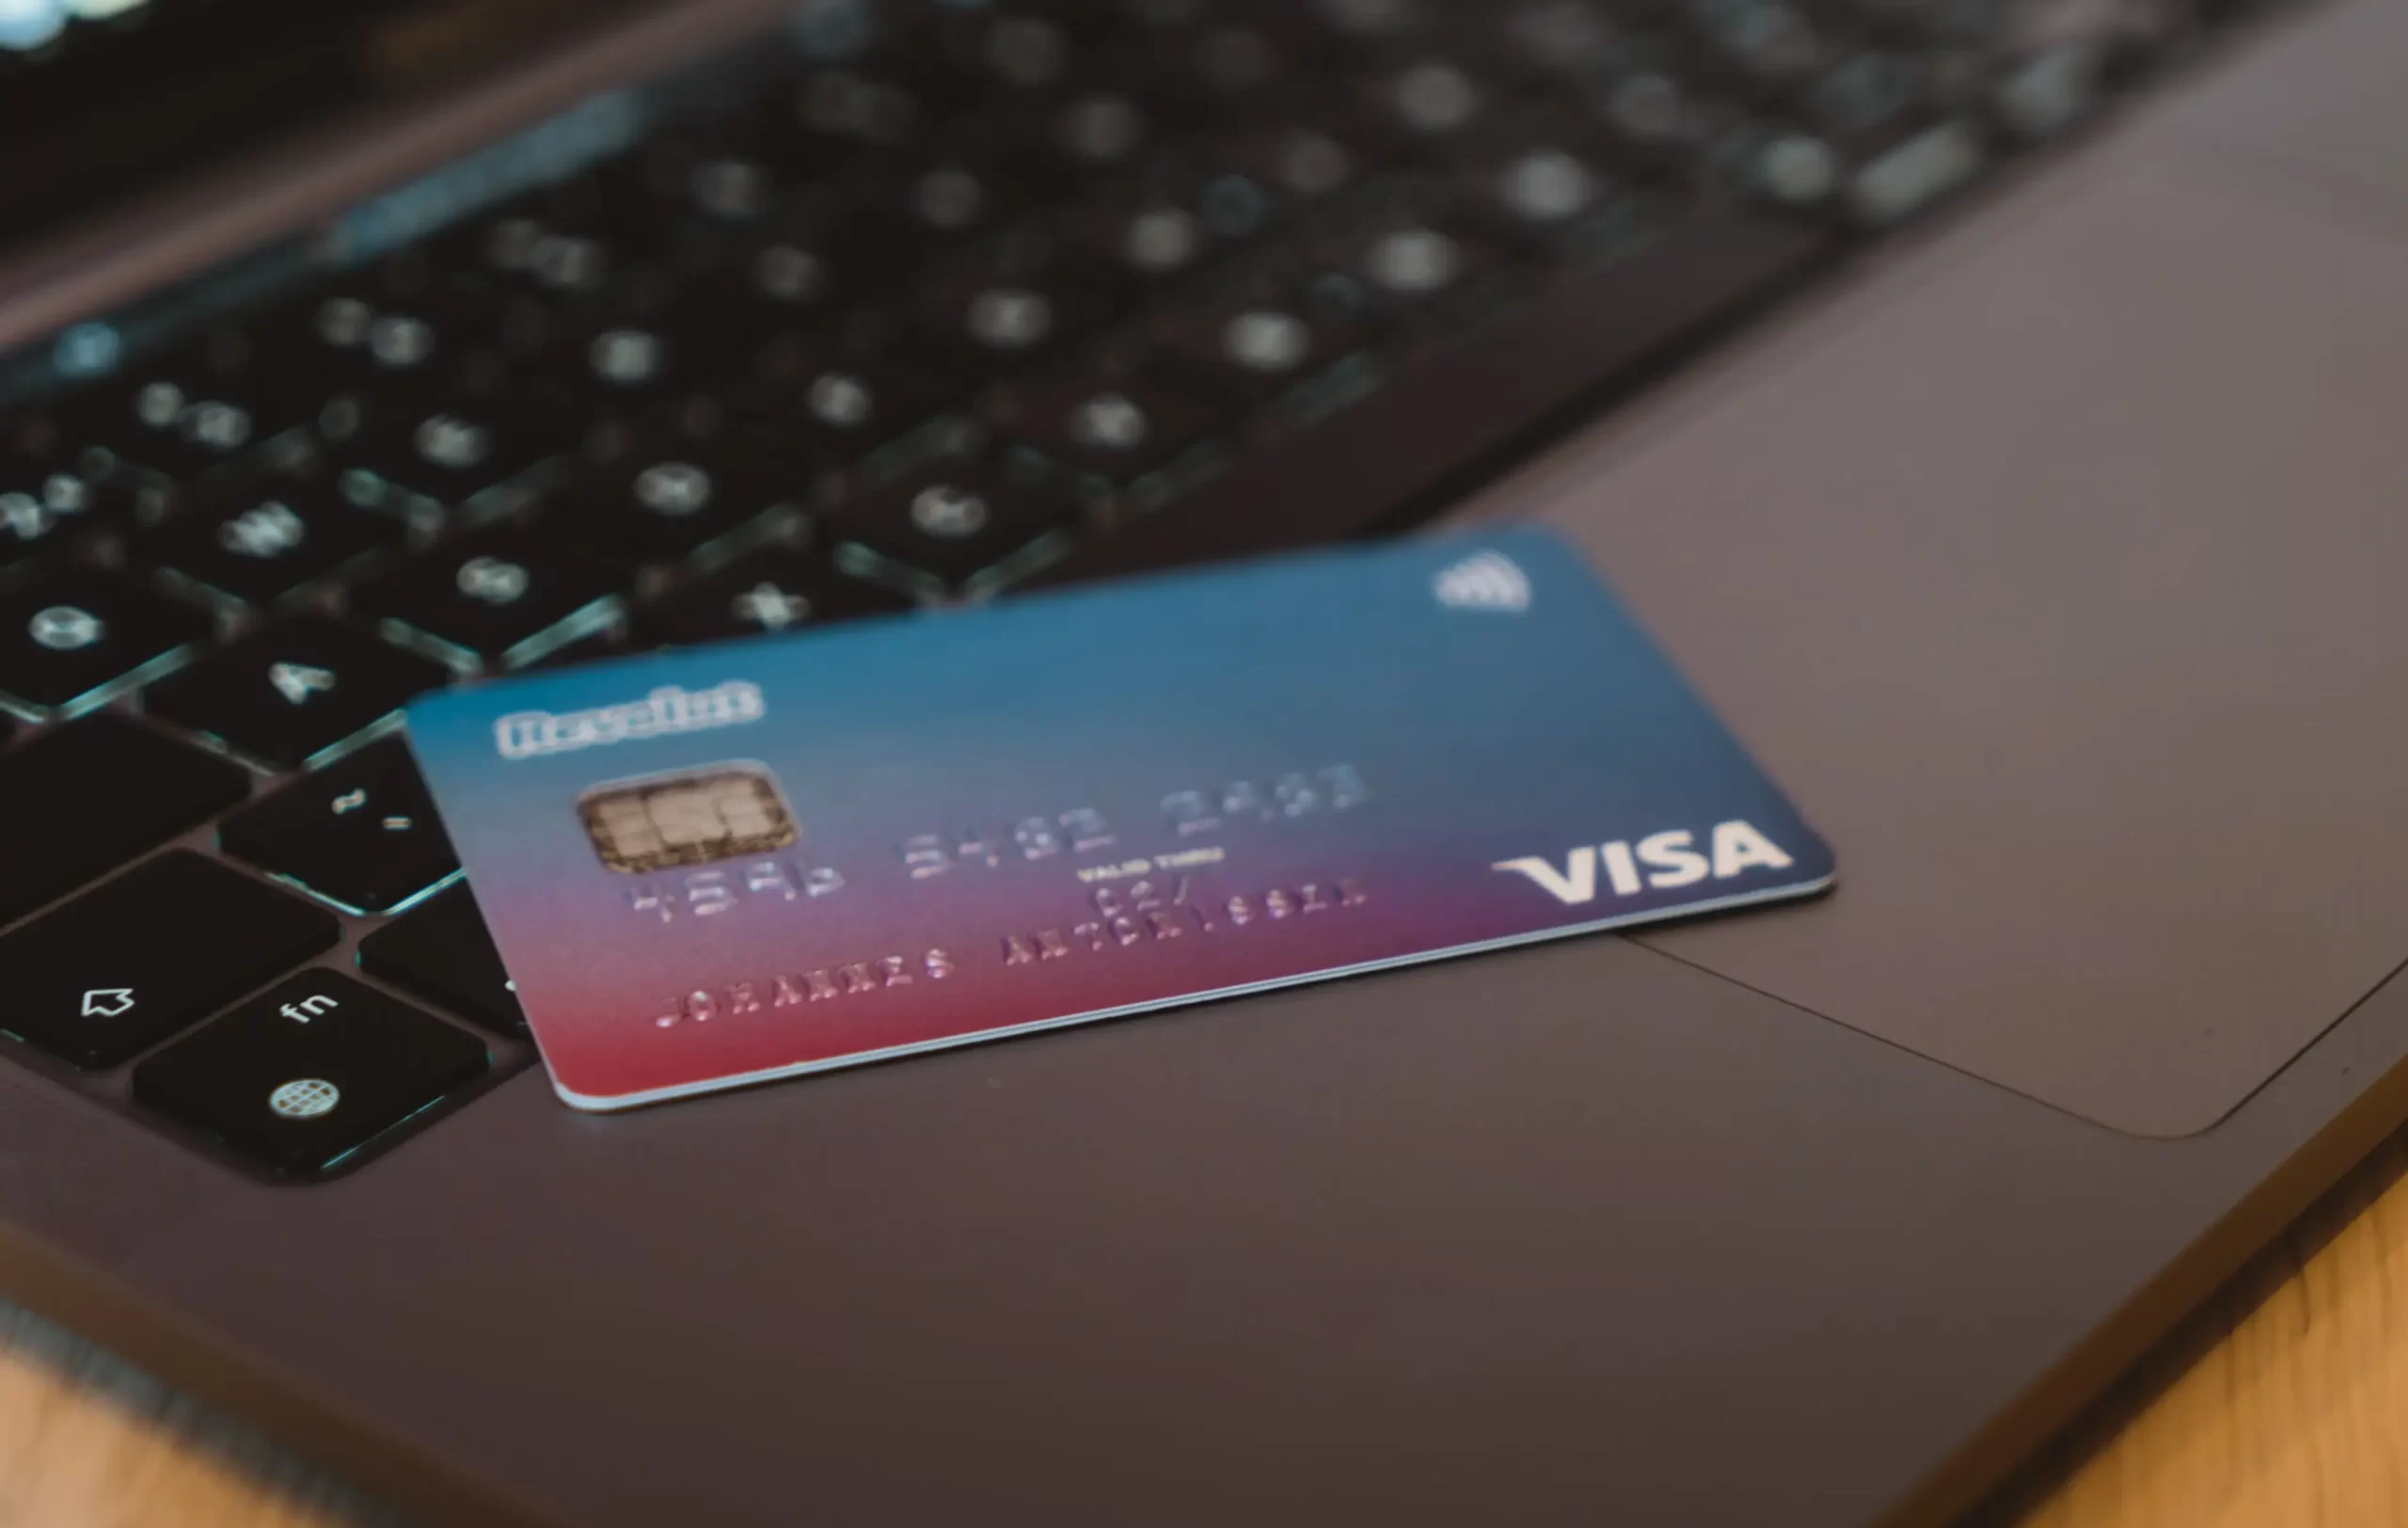 visa card placed on a laptop